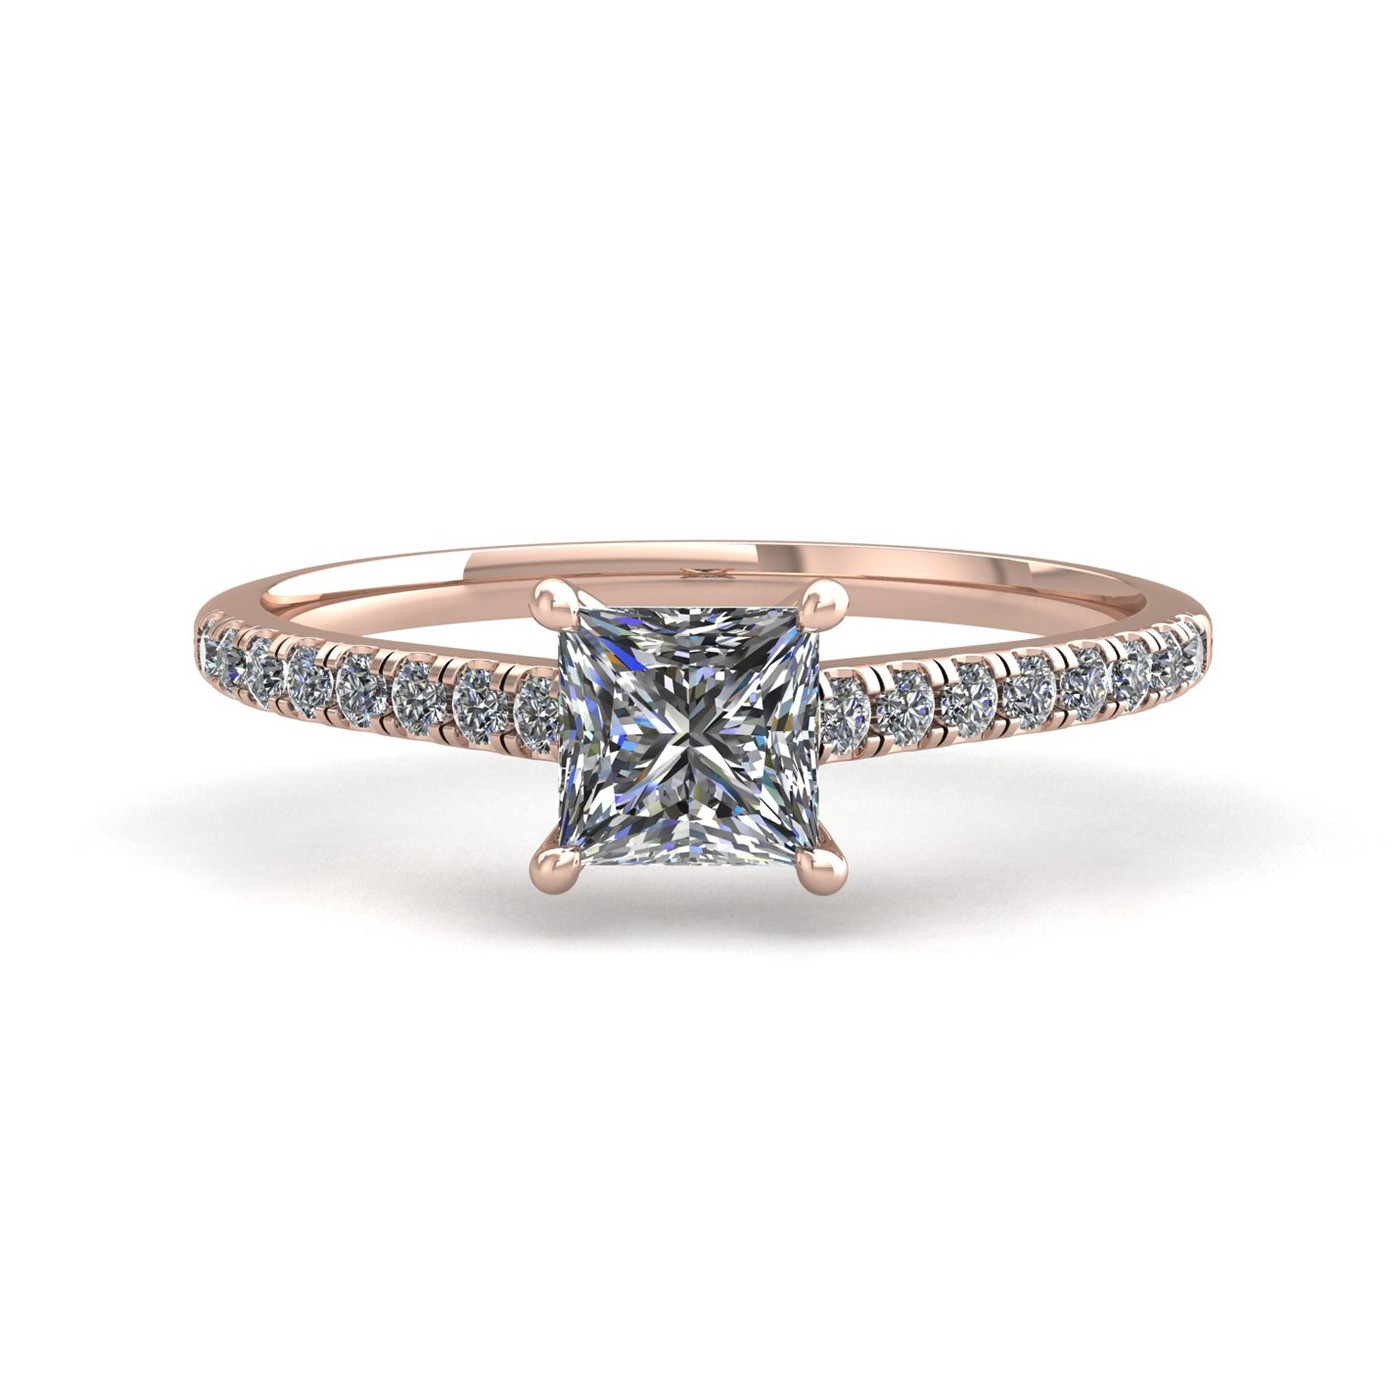 18k rose gold  0,30 ct 4 prongs princess cut diamond engagement ring with whisper thin pavÉ set band Photos & images